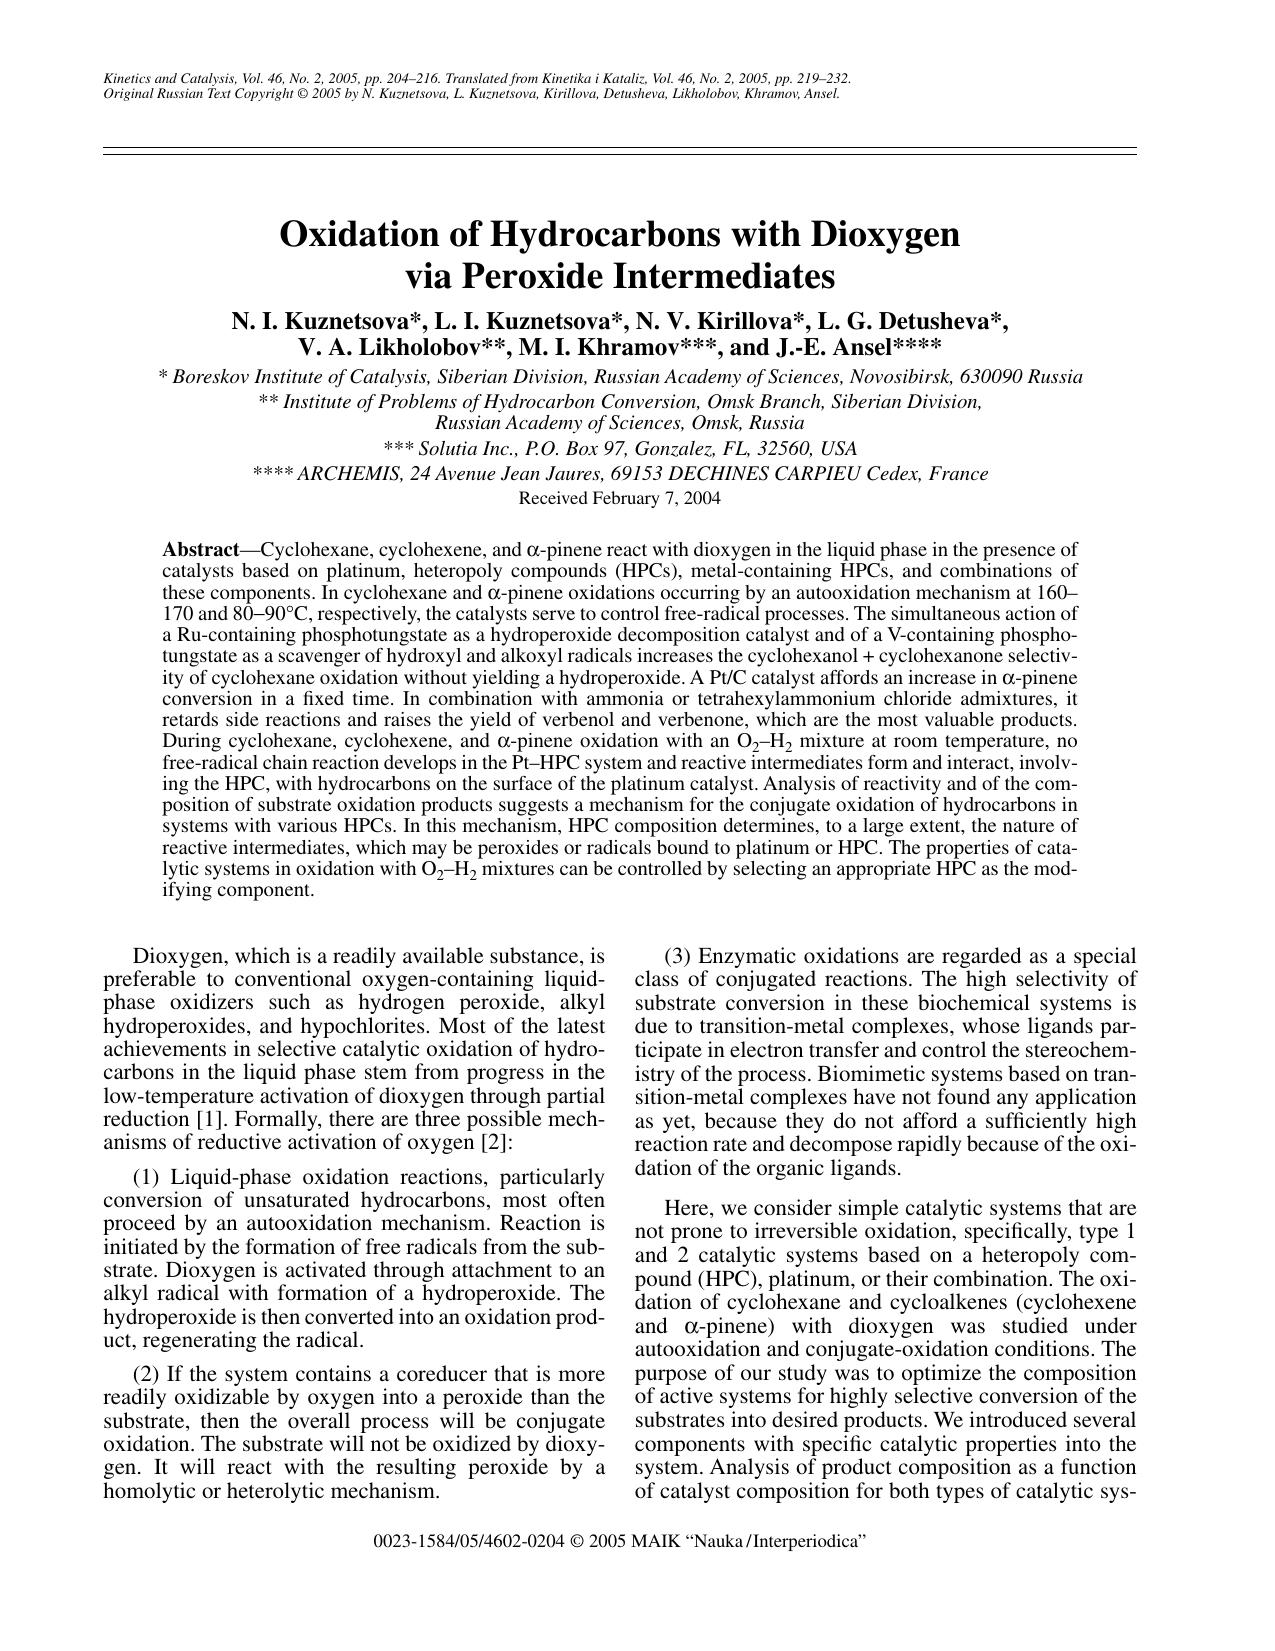 Oxidation of hydrocarbons with dioxygen via peroxide intermediates by Unknown